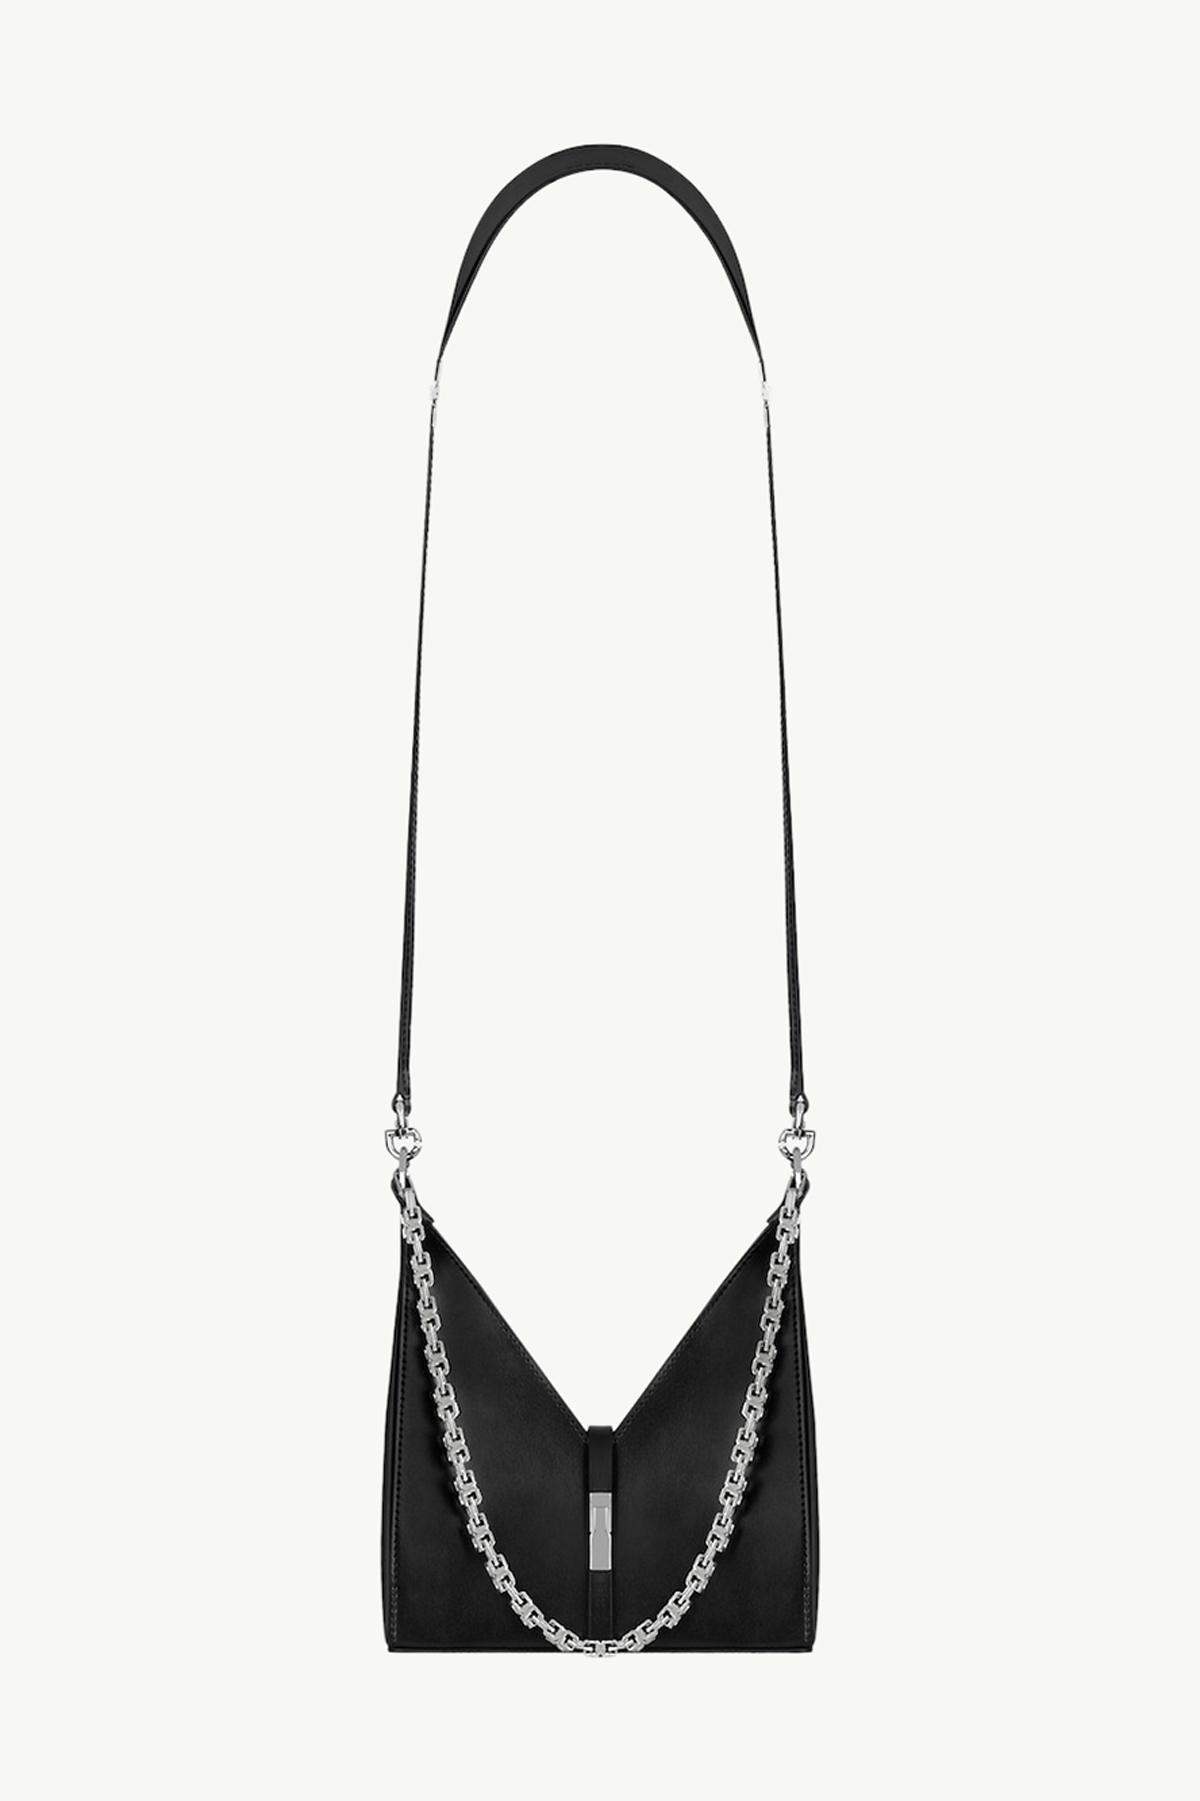 GIVENCHY Mini Cut Out Crossbody Bag in Black Smooth Box Calfskin Leather with Chain 2